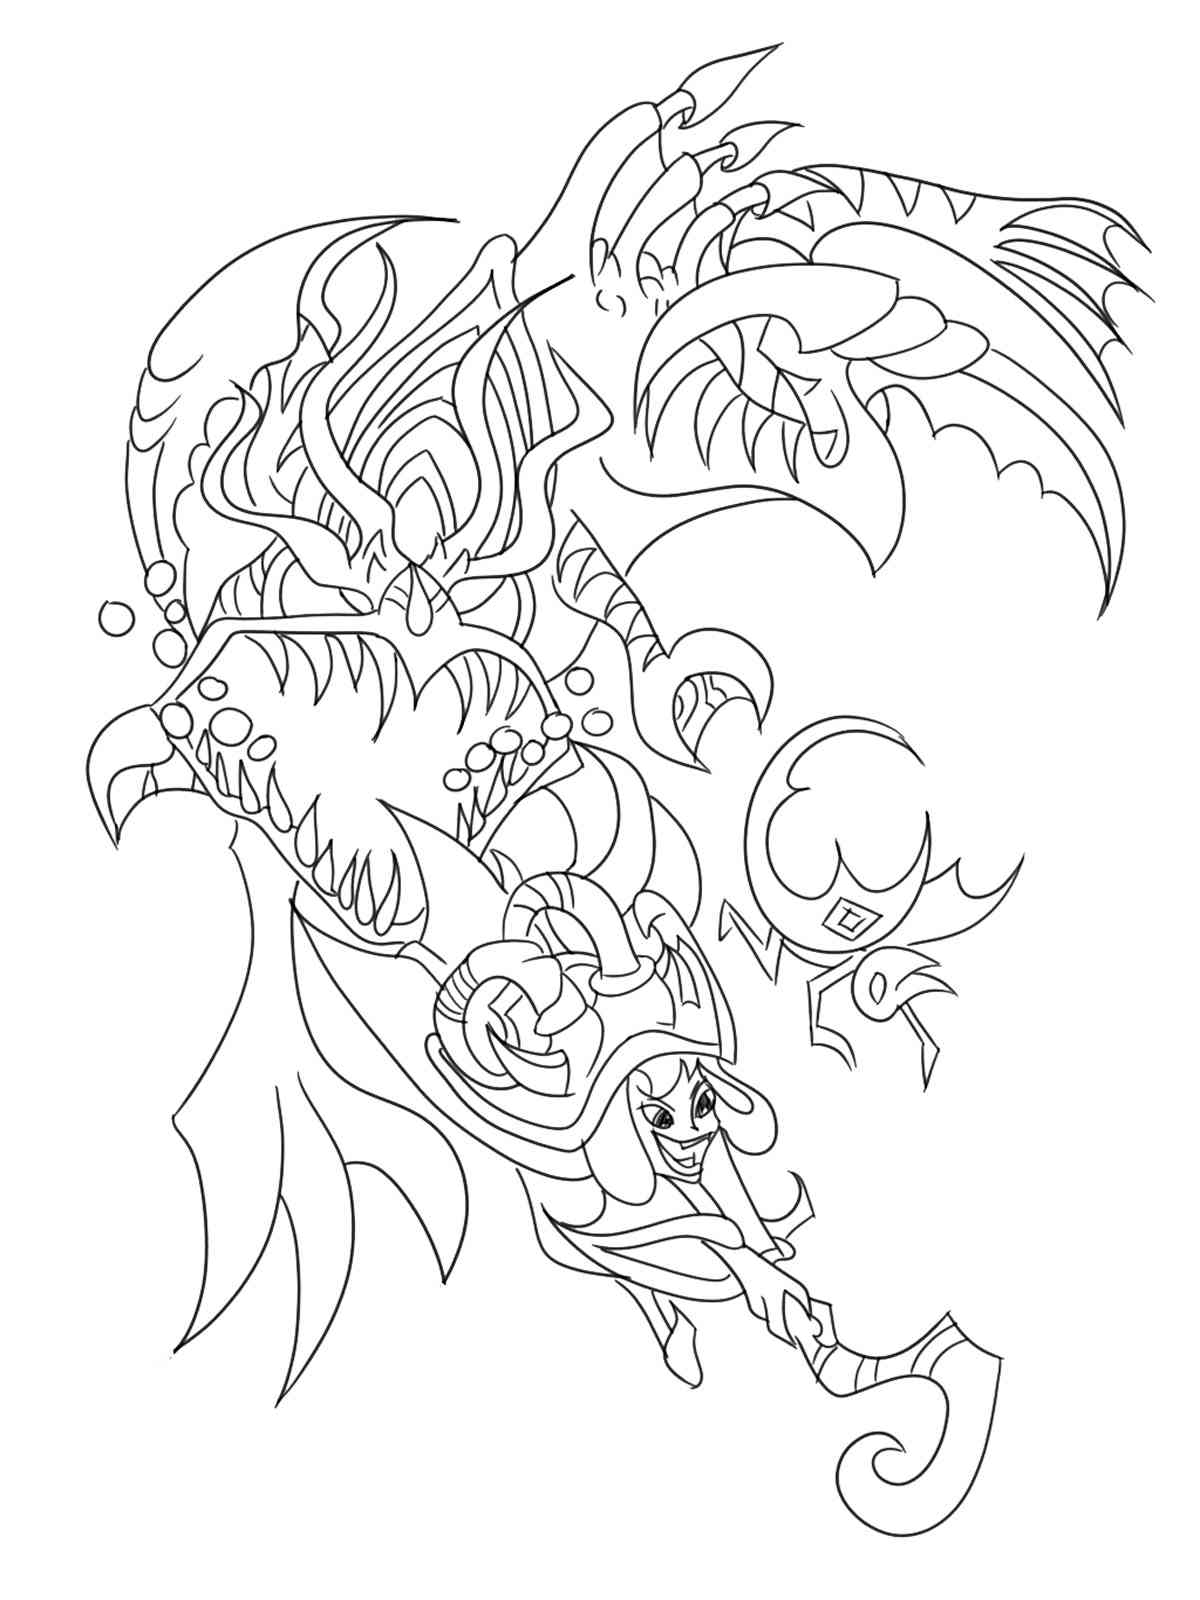 Cho’Gath and Lulu League Of Legends coloring page